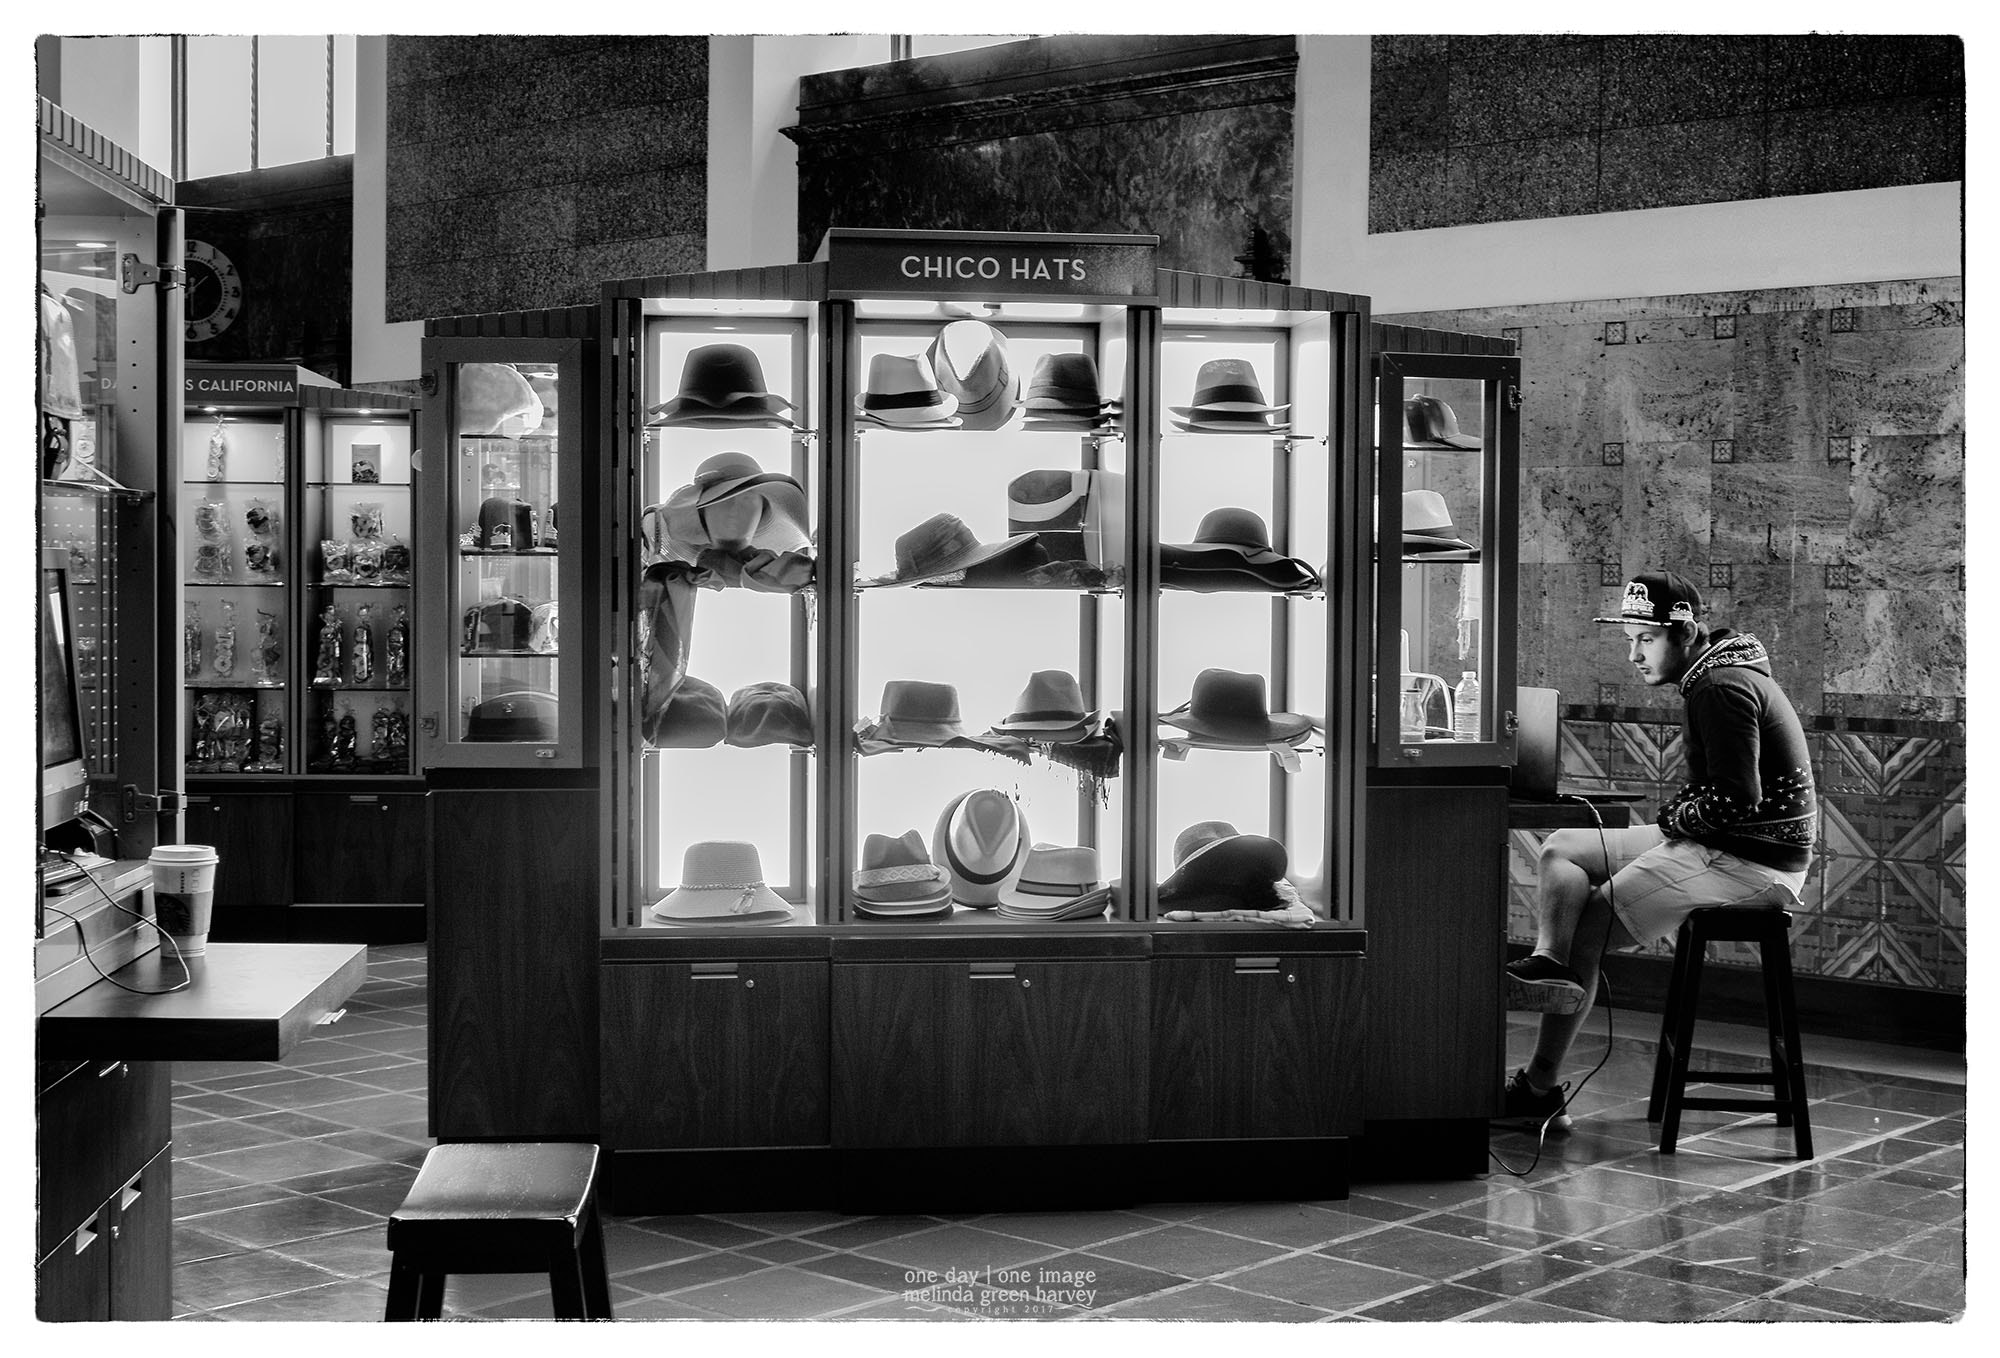 Leica Summarit-M 50mm F2.4 sample photo. The slow afternoon at the hat store photography